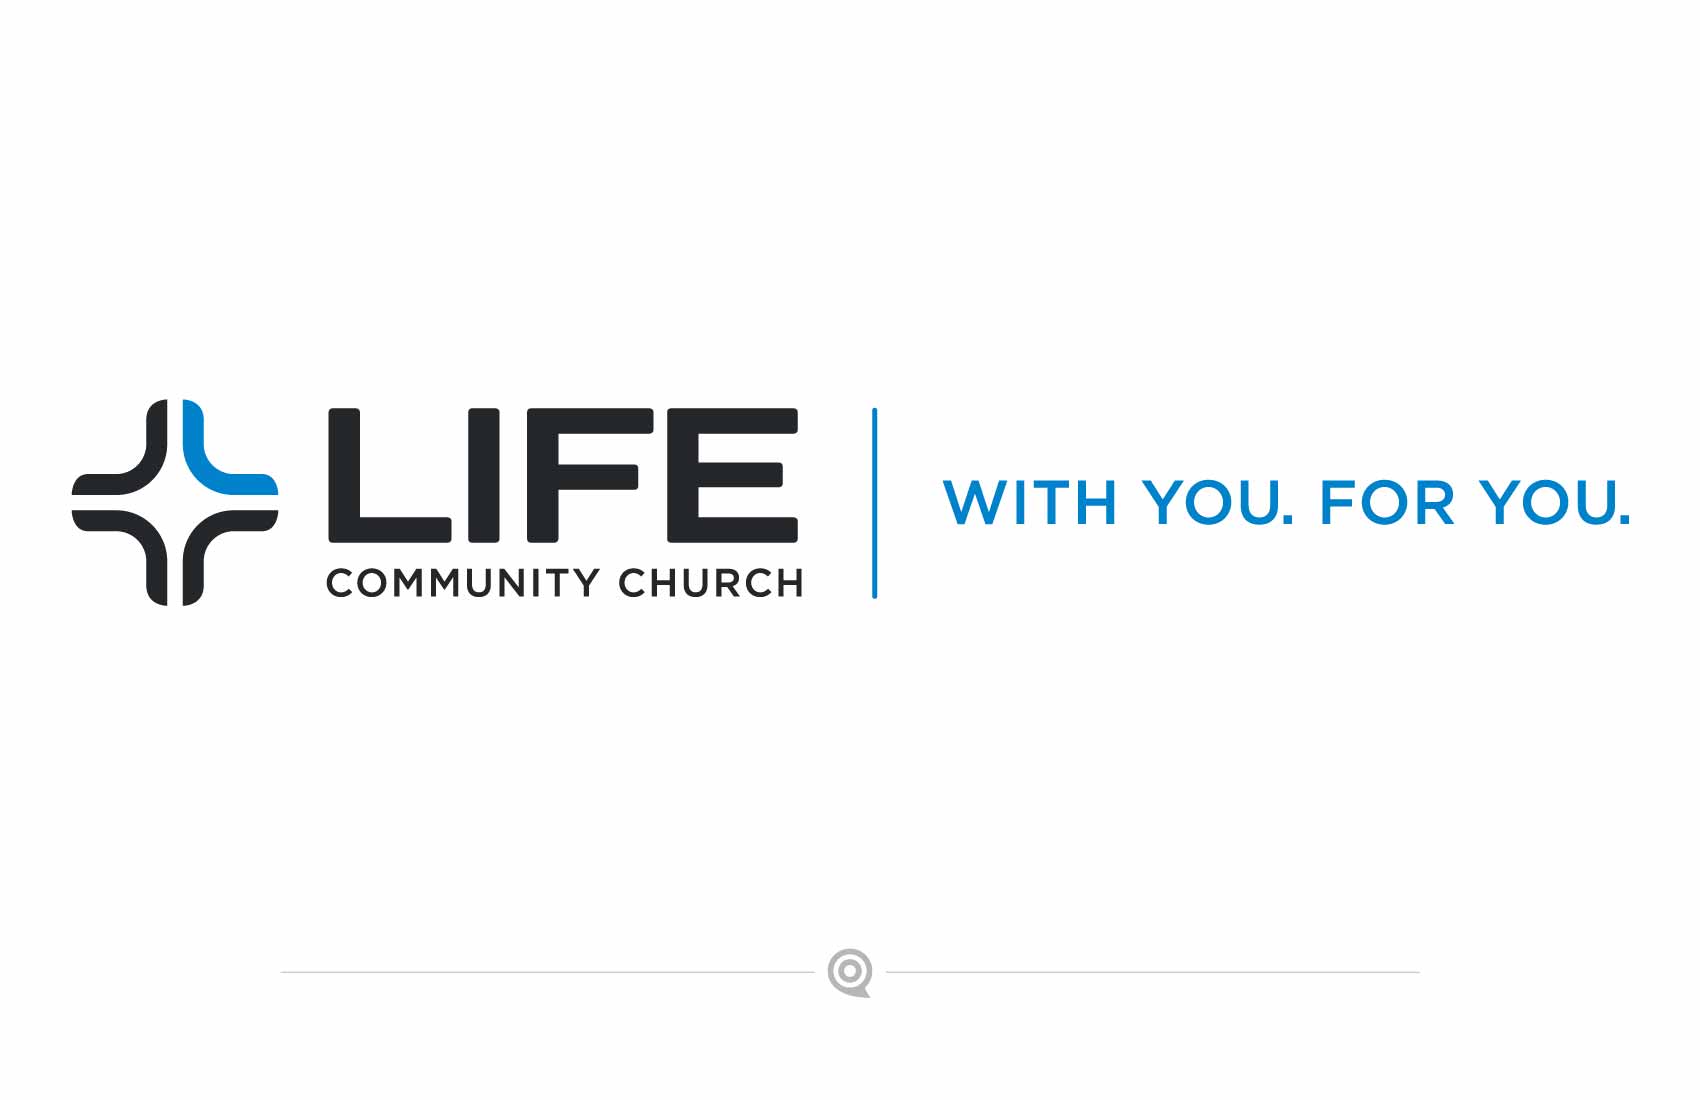 Life Community Church | With You. For You.